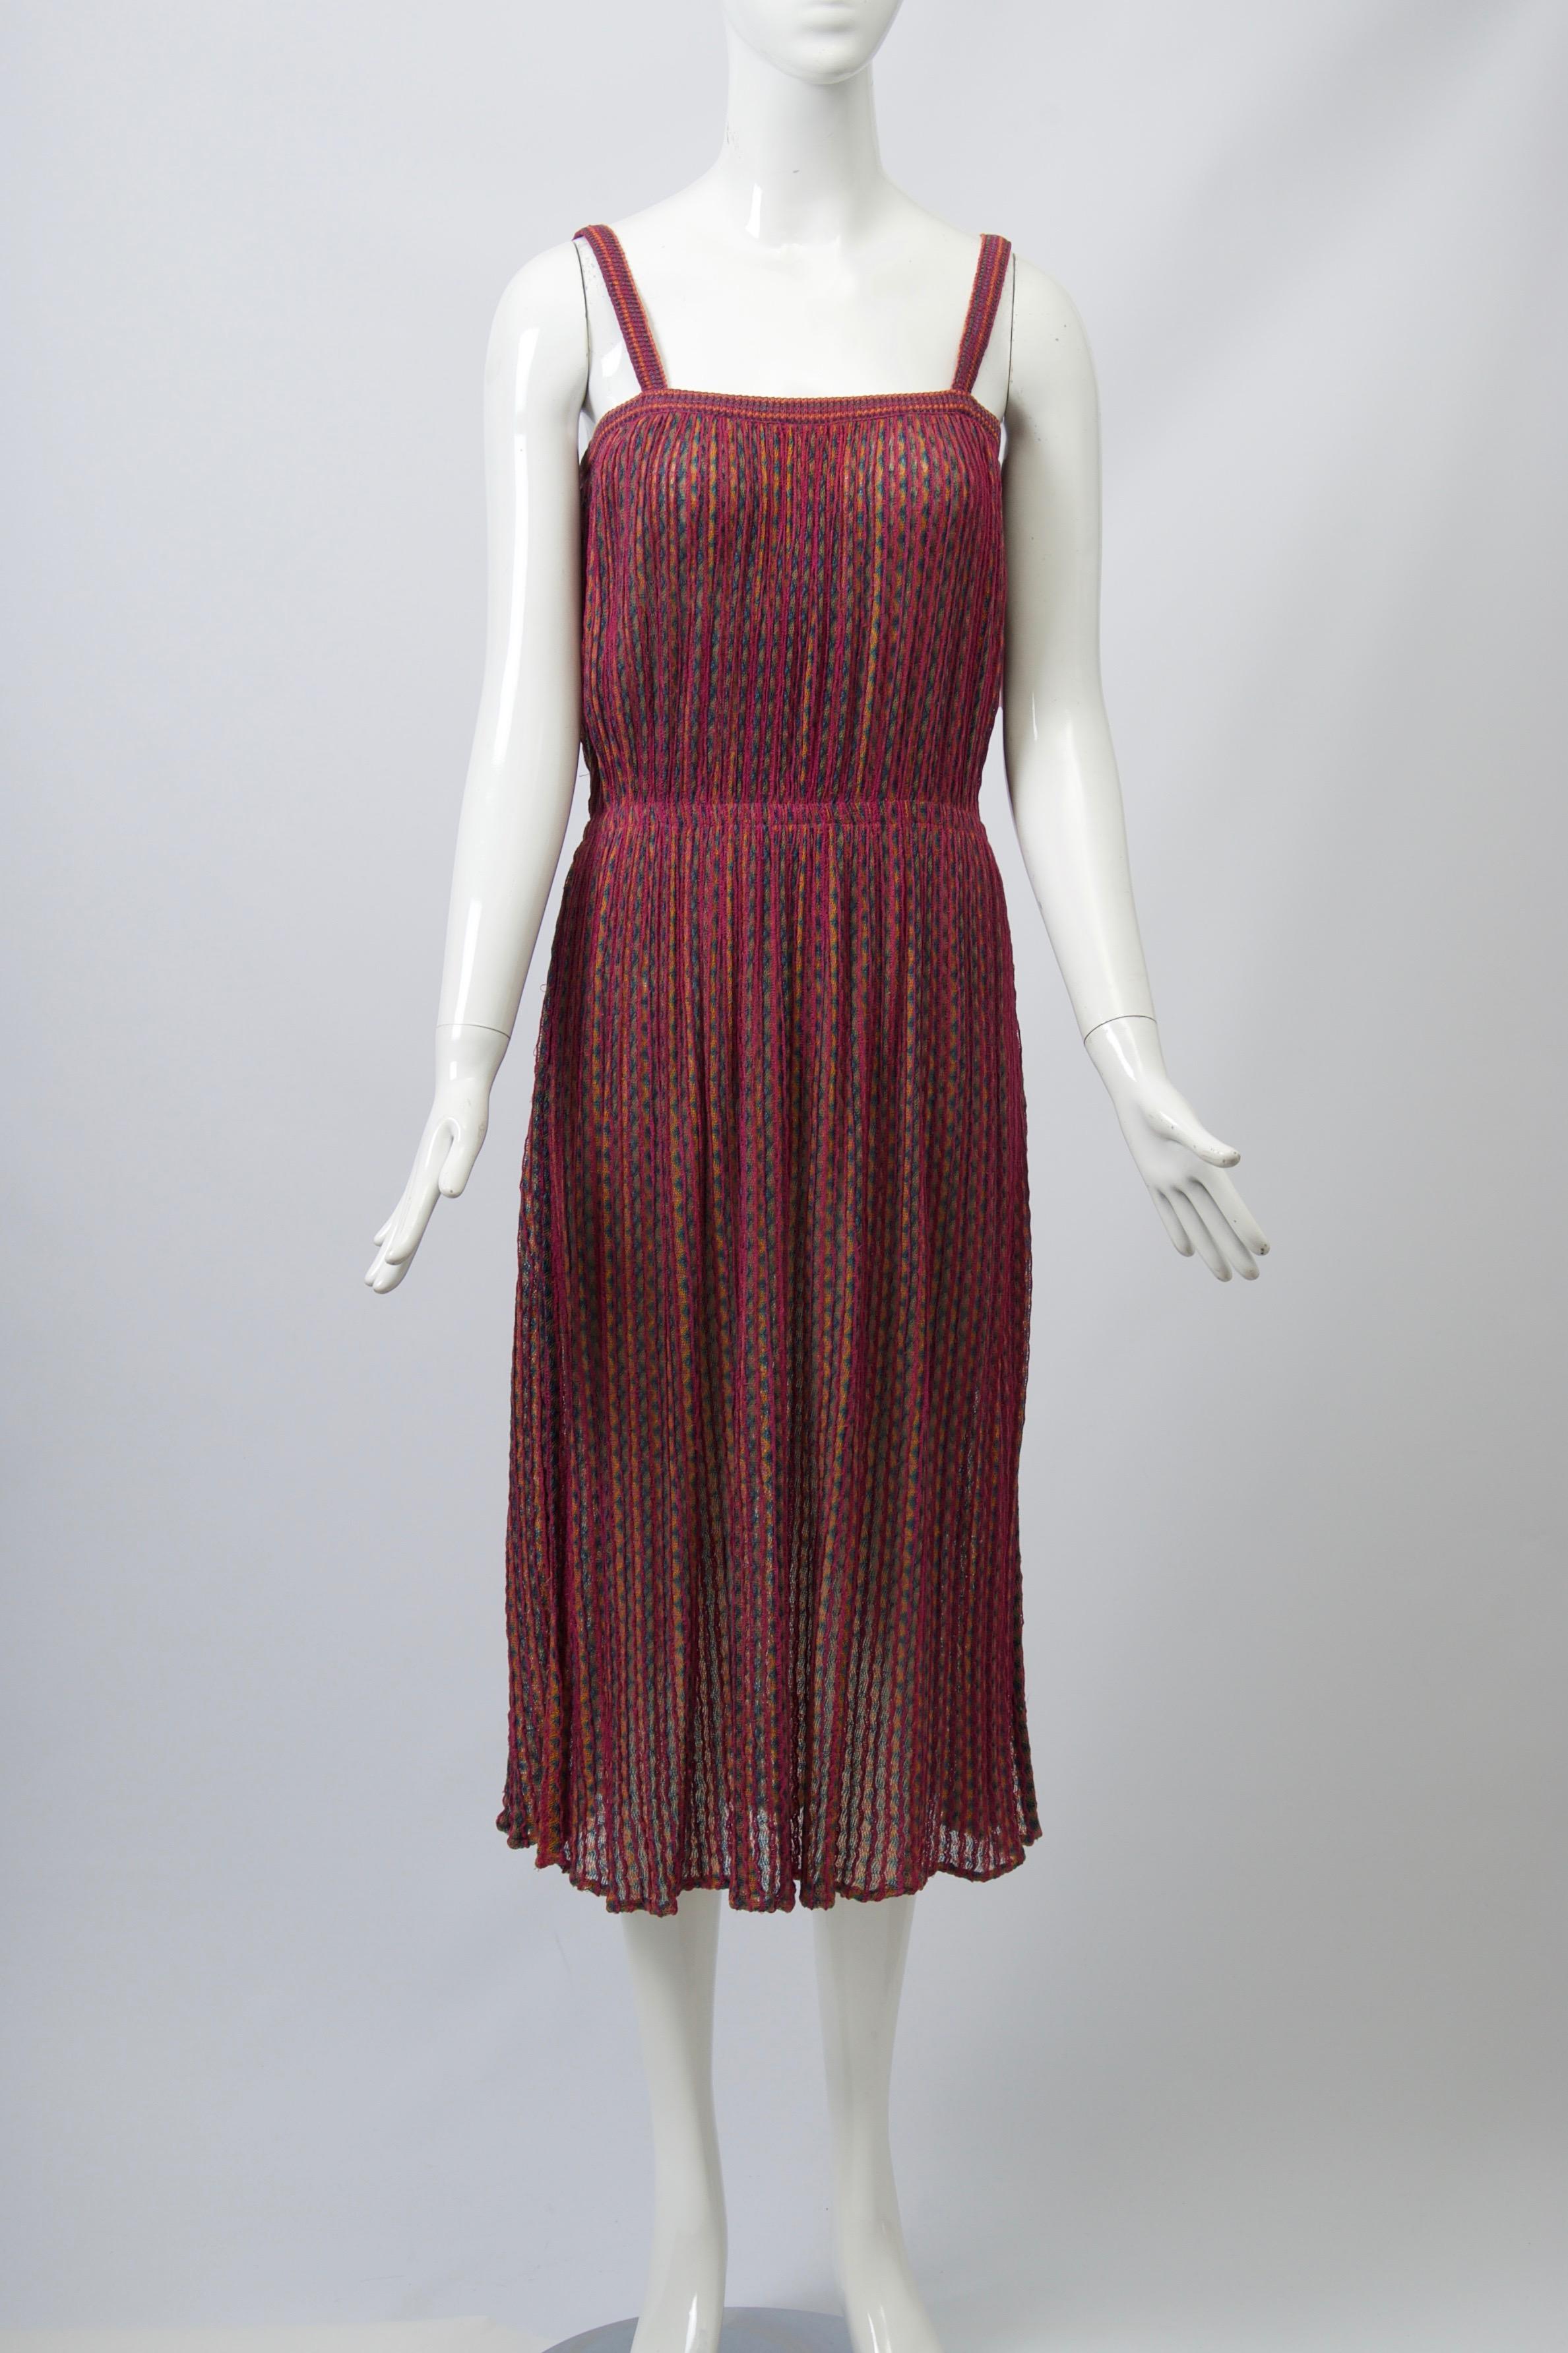 Missoni sundress, c.1970s-'80s, with spaghetti straps and interior elastic band that gathers the fabric in at the waist. Predominantly raspberry zigzag stripe knit. Light, packable and easy to wear. Unlabeled, except for size S (waist flexible).